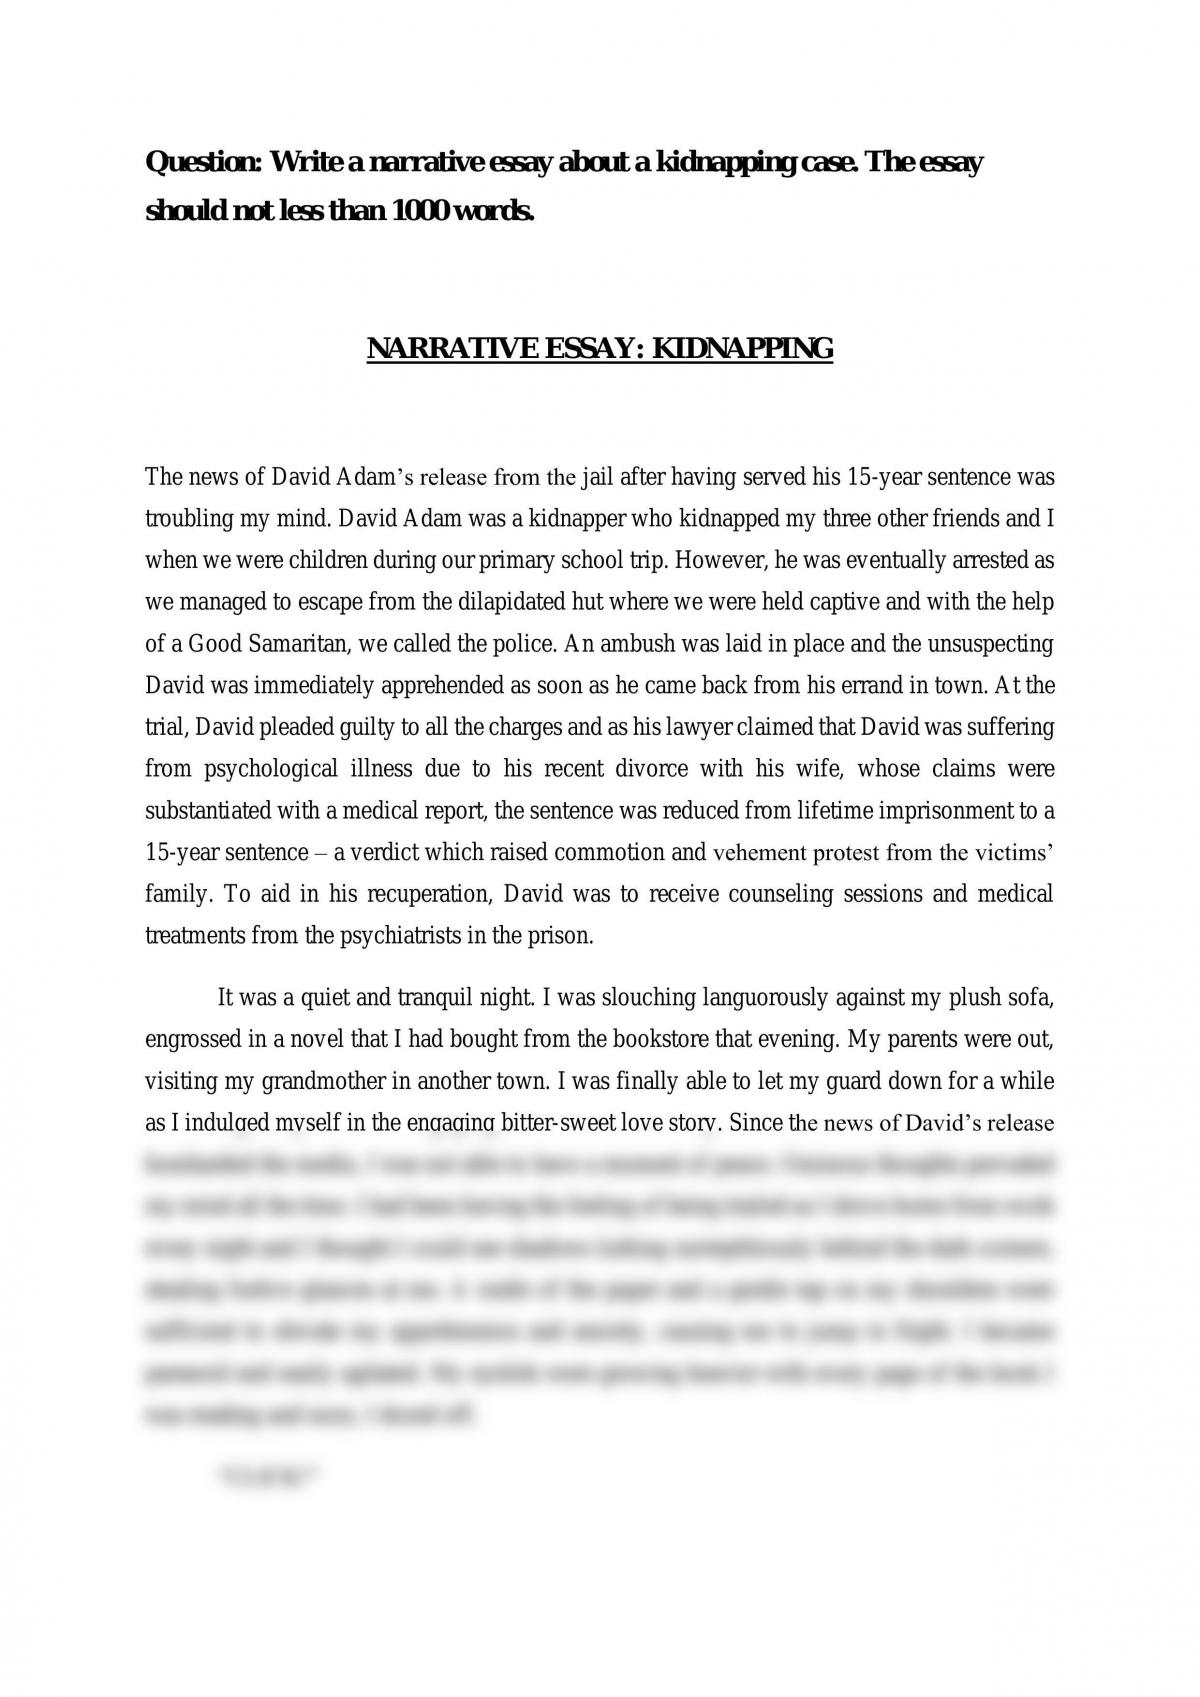 an expository essay on kidnapping